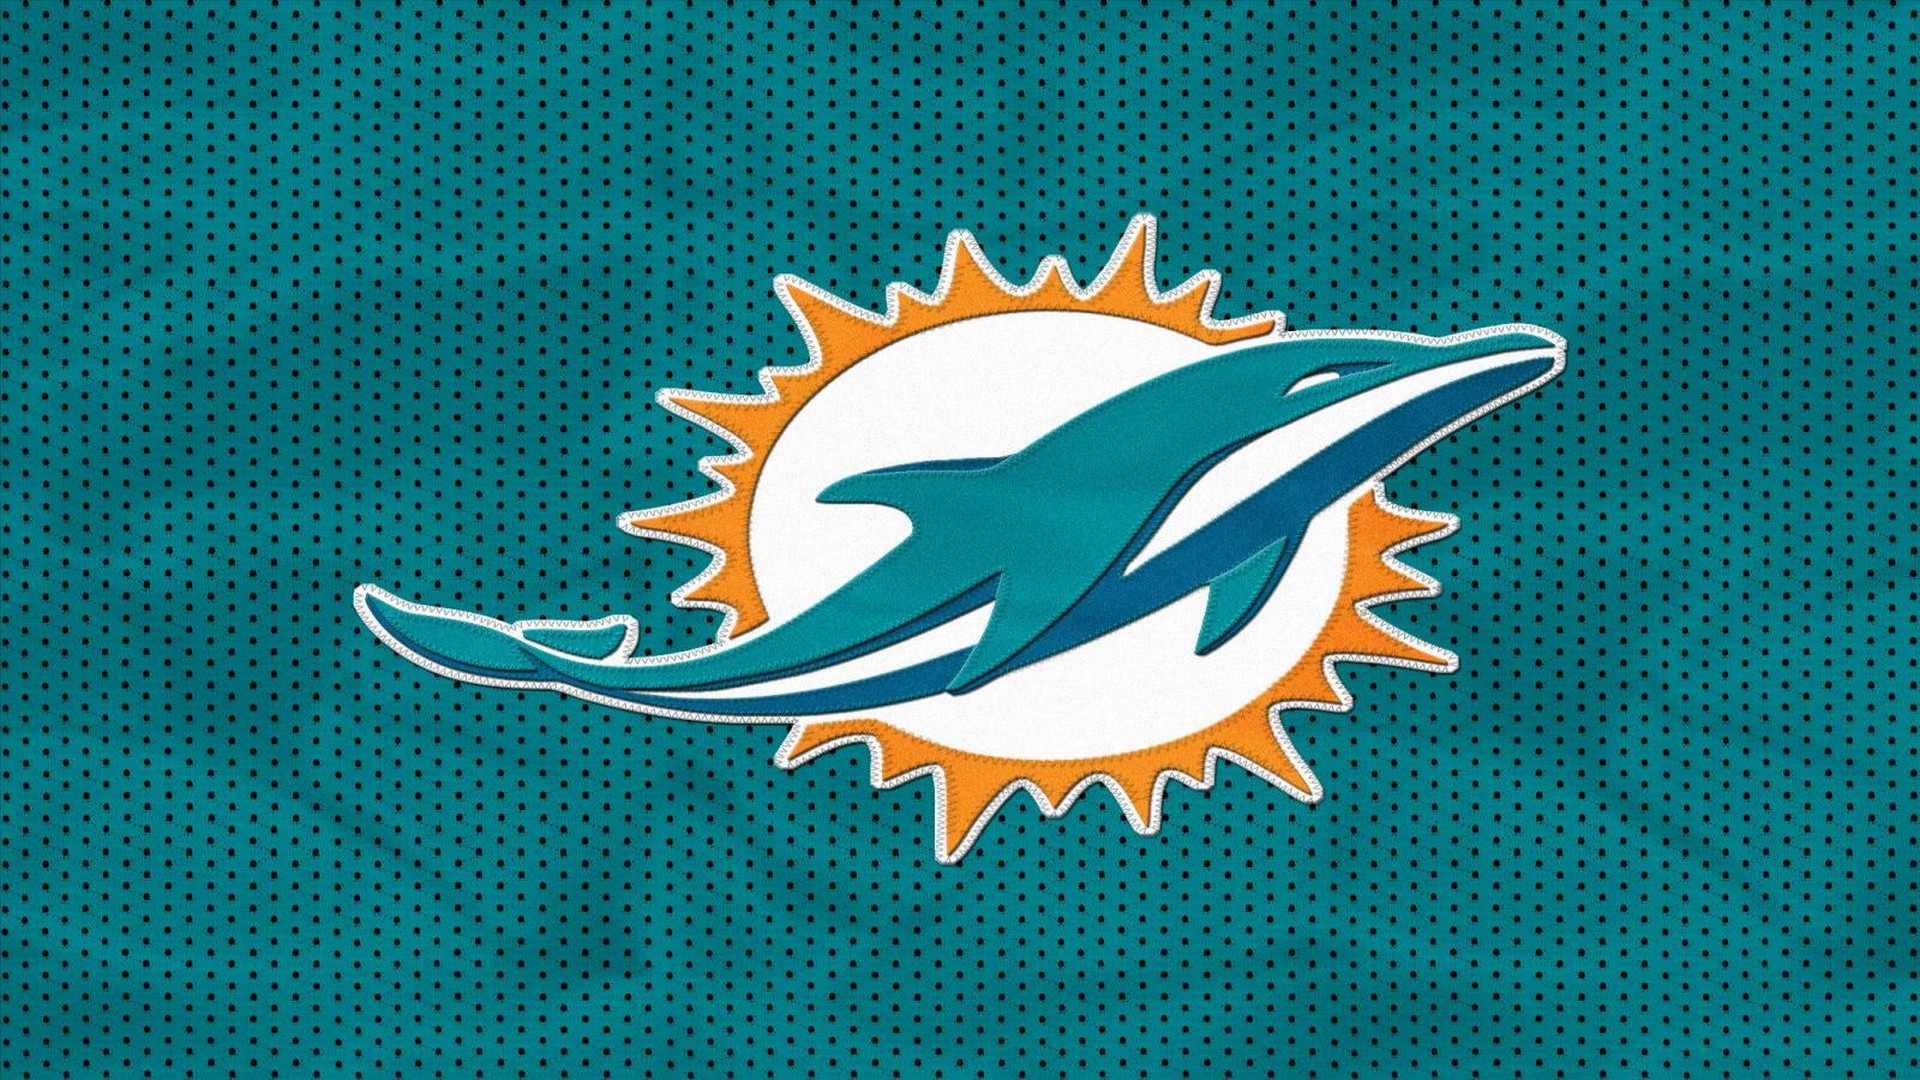 Miami Dolphins HD Wallpapers With Resolution 1920X1080 pixel. You can make this wallpaper for your Mac or Windows Desktop Background, iPhone, Android or Tablet and another Smartphone device for free